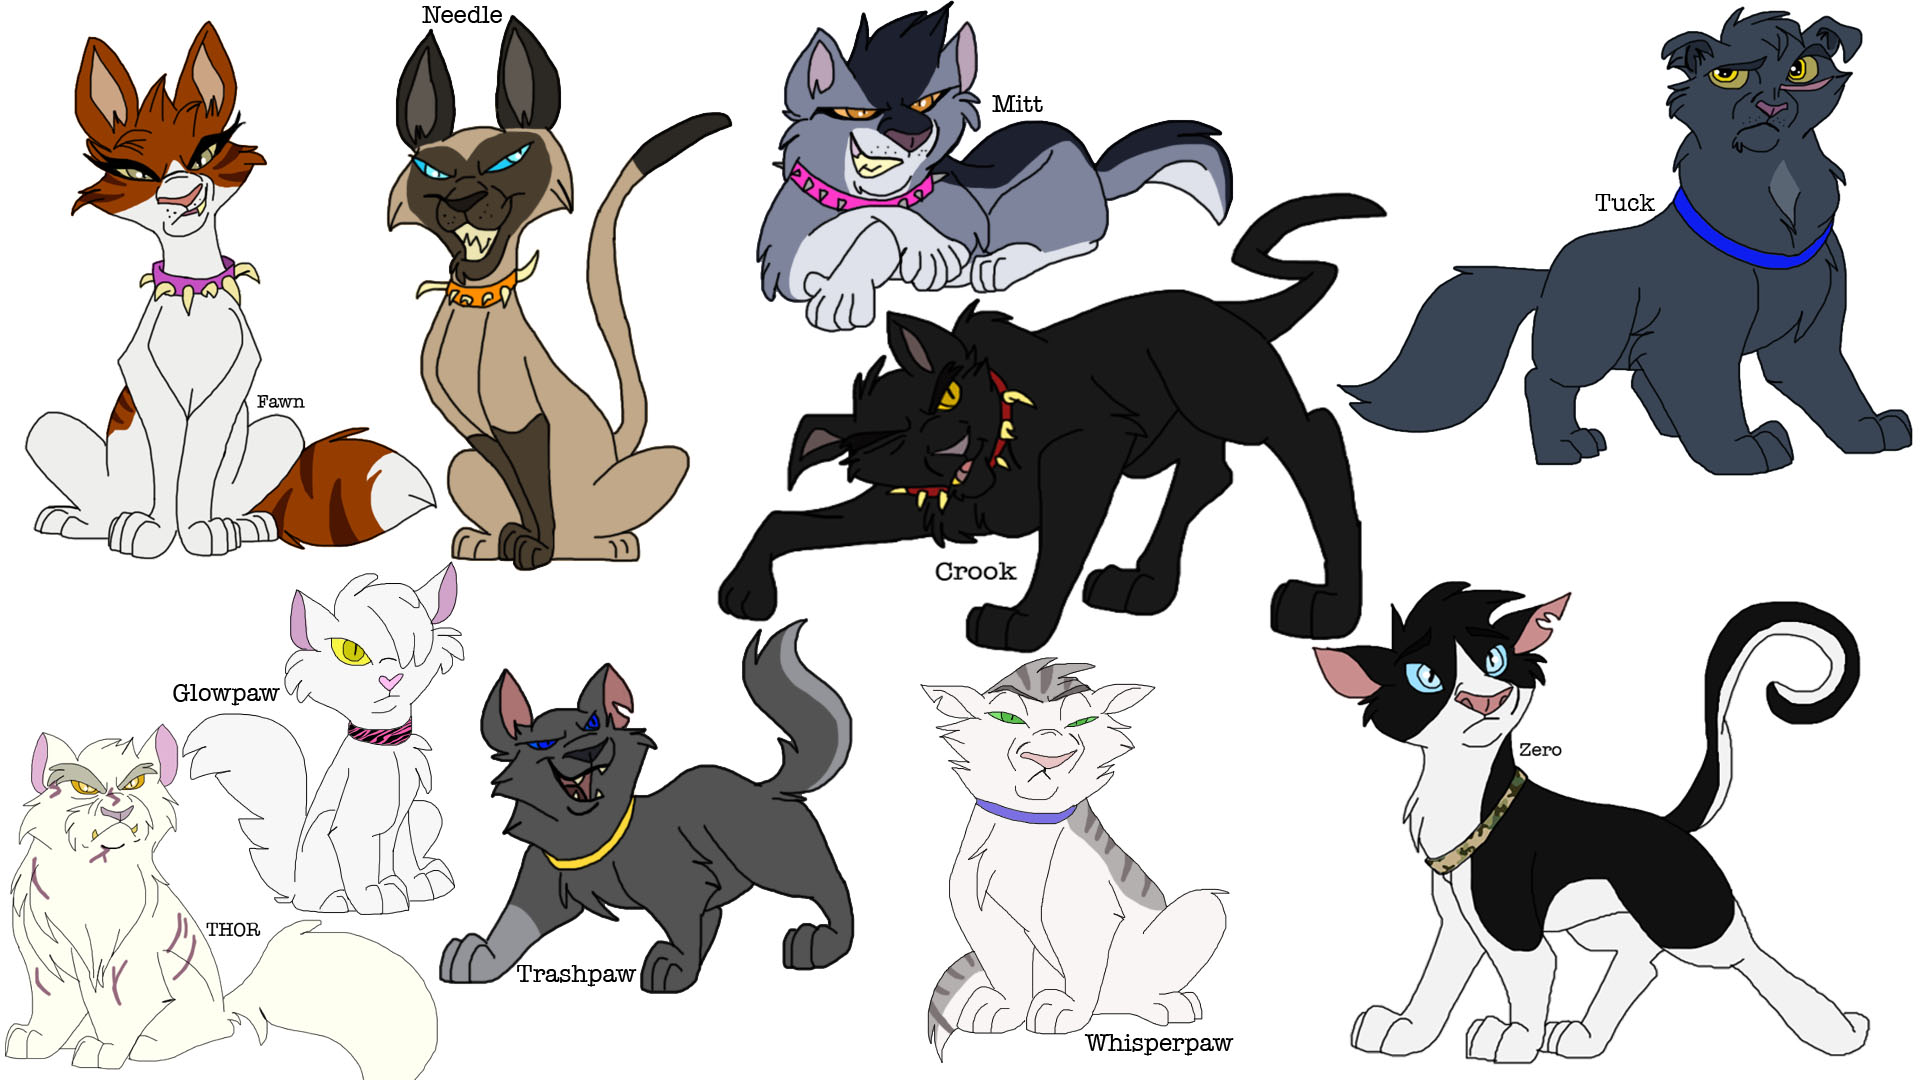 Warrior cats clans. Blood Clan Warrior Cats. Warrior Cats OC. Warrior Cats Clan Randomizer. Warriors Cats Blood Clan picture.